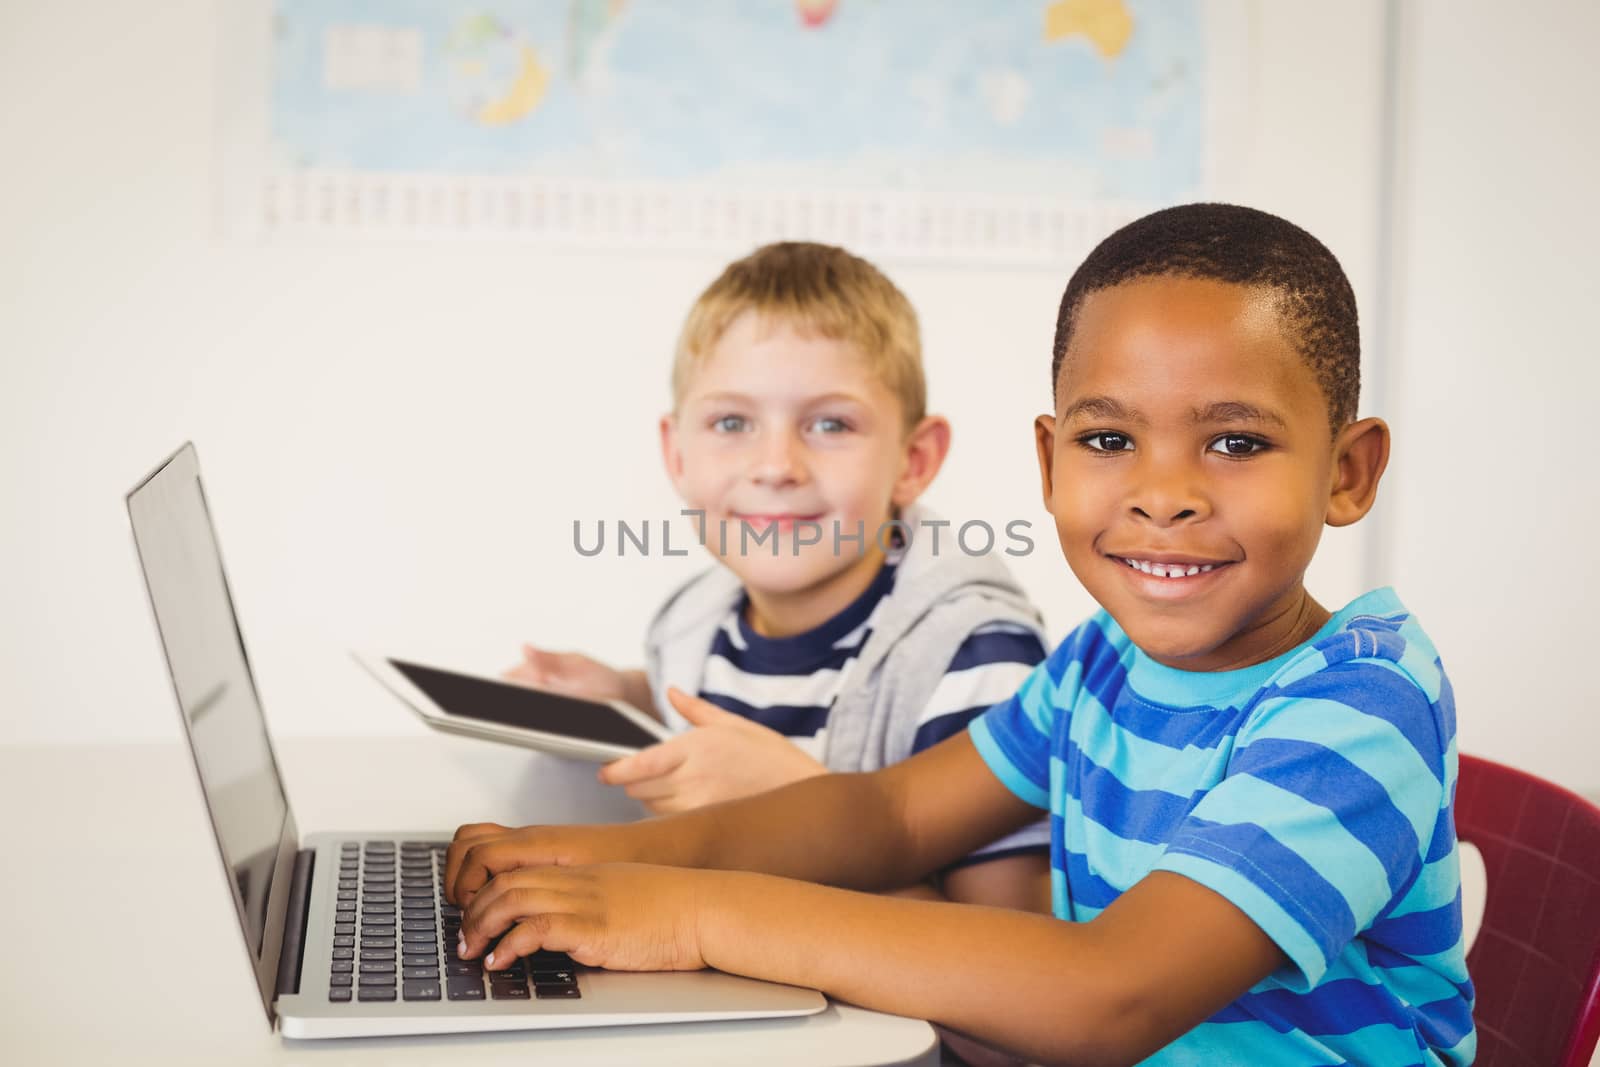 Portrait of kids using a laptop and digital tablet in classroom by Wavebreakmedia